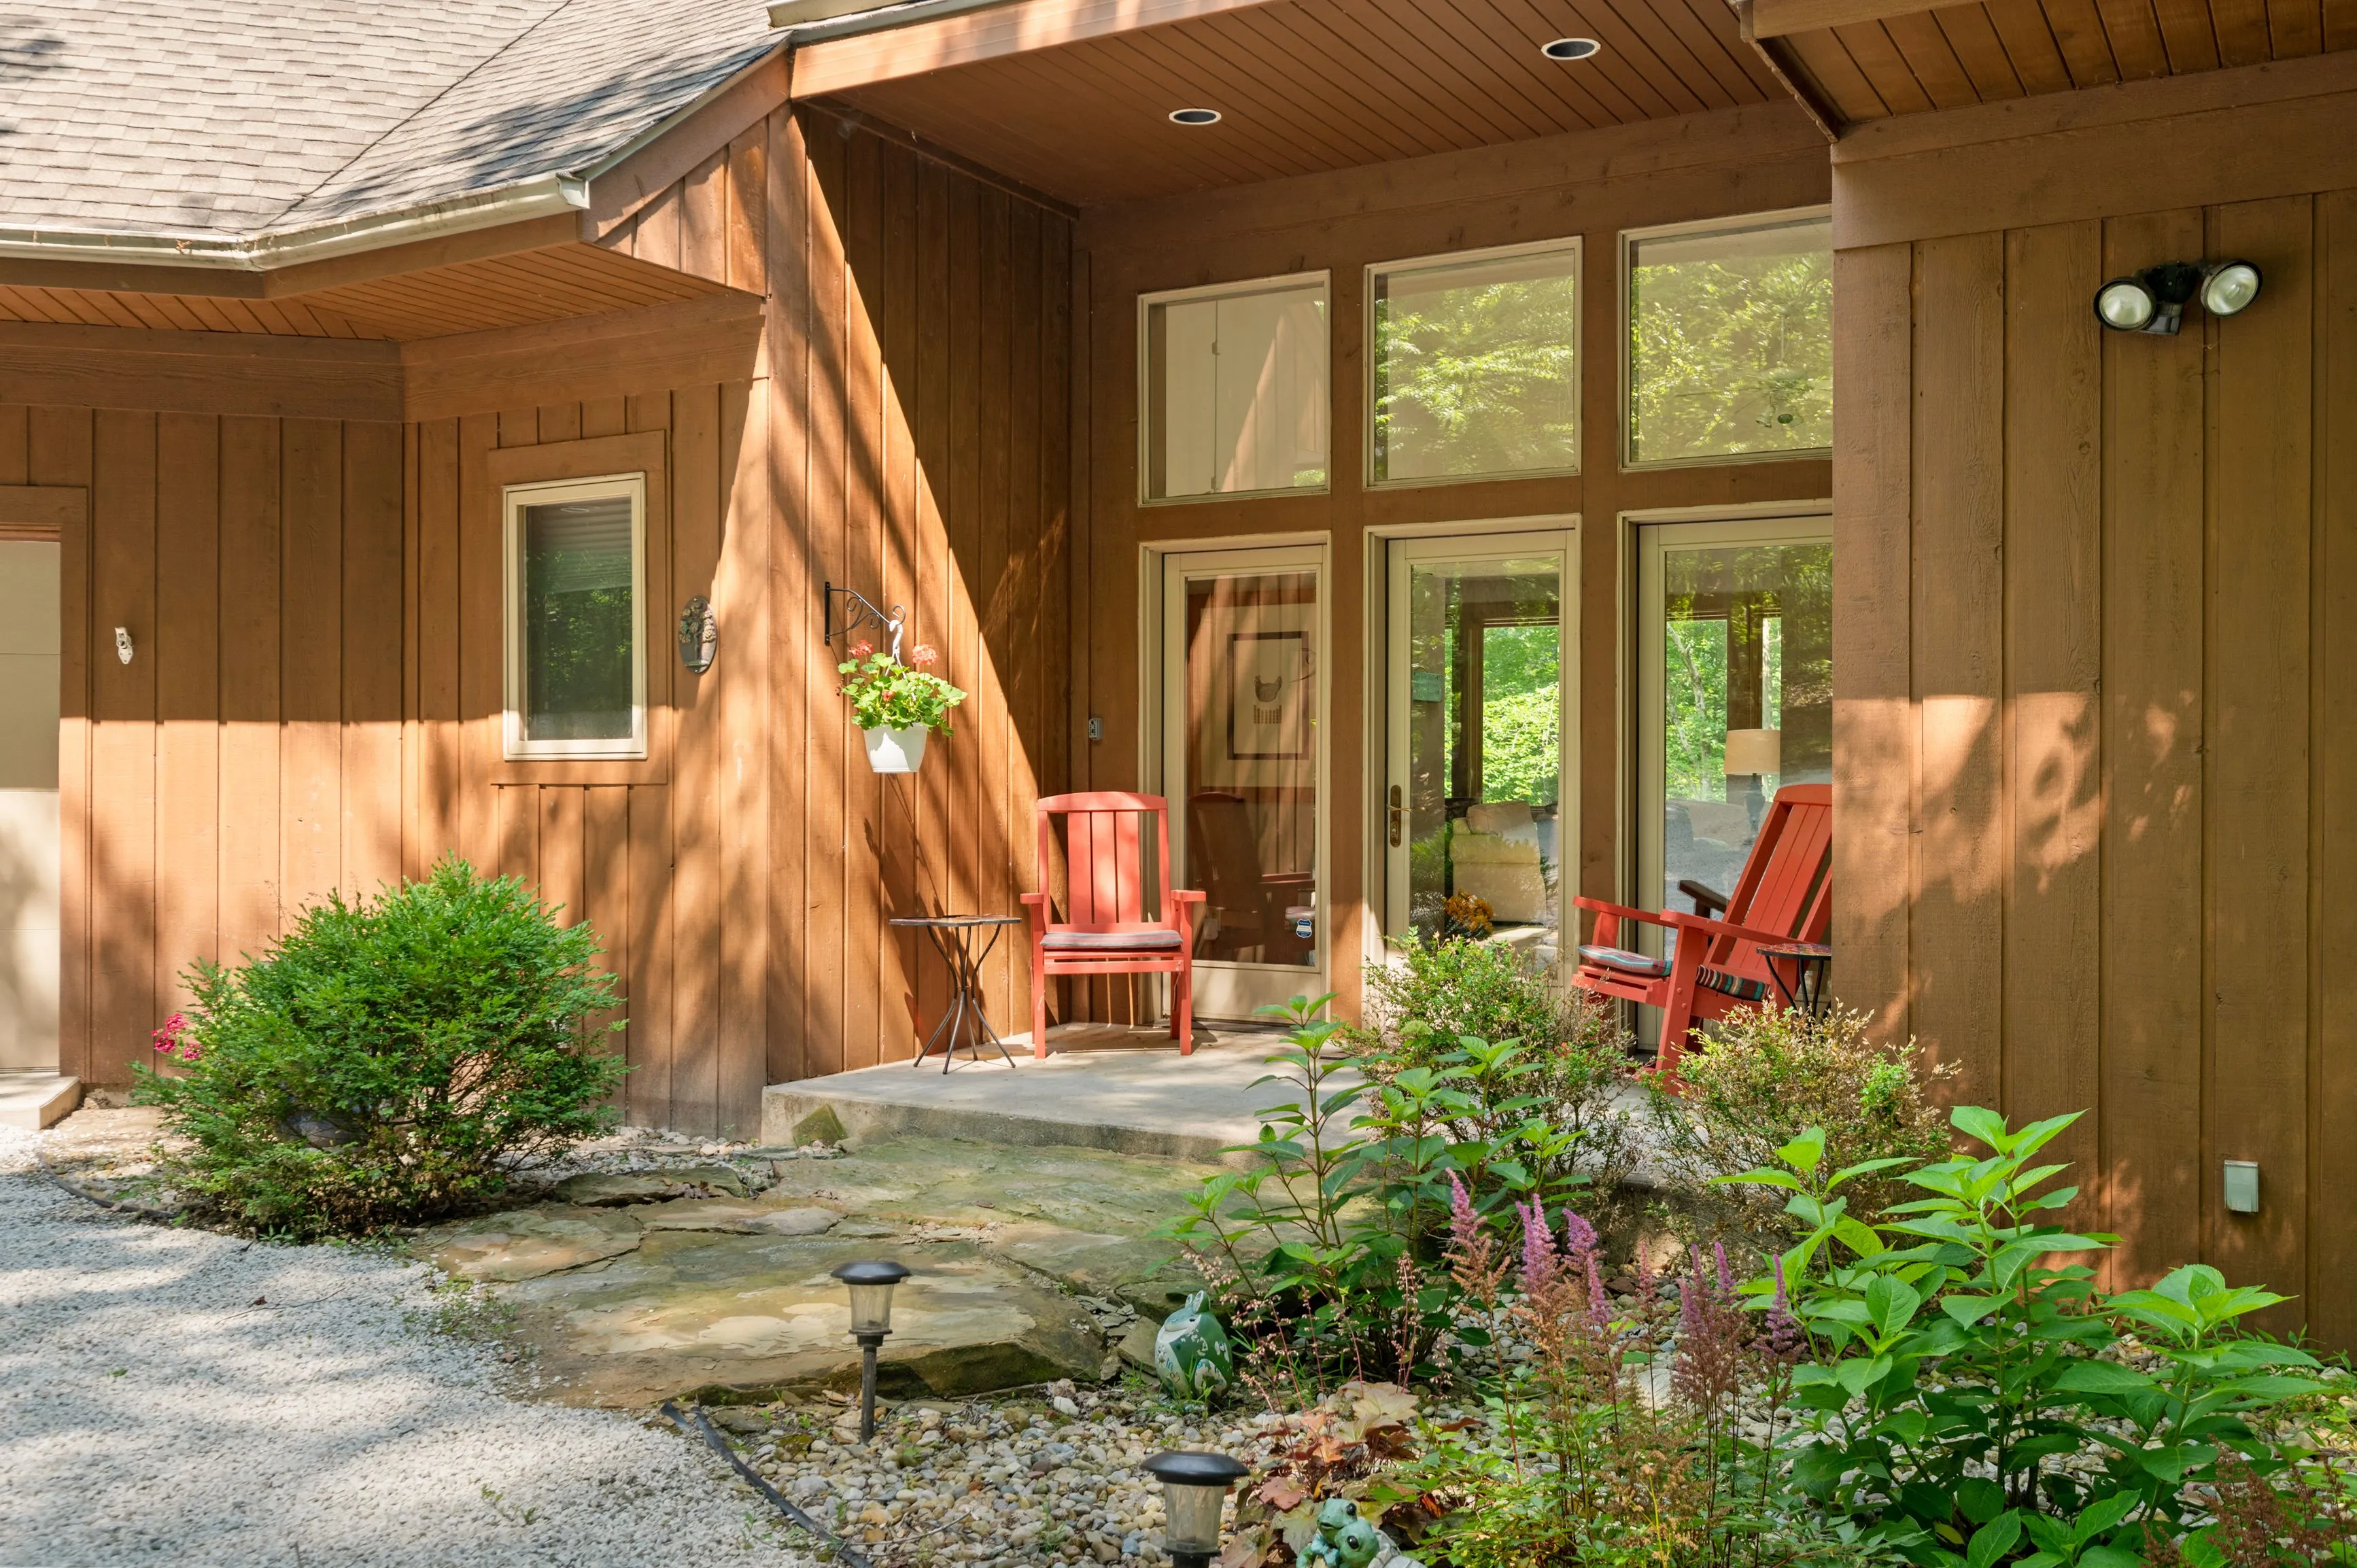 Exterior view of a cozy woodland home with a stone pathway, large windows, and red chairs on the porch surrounded by greenery.